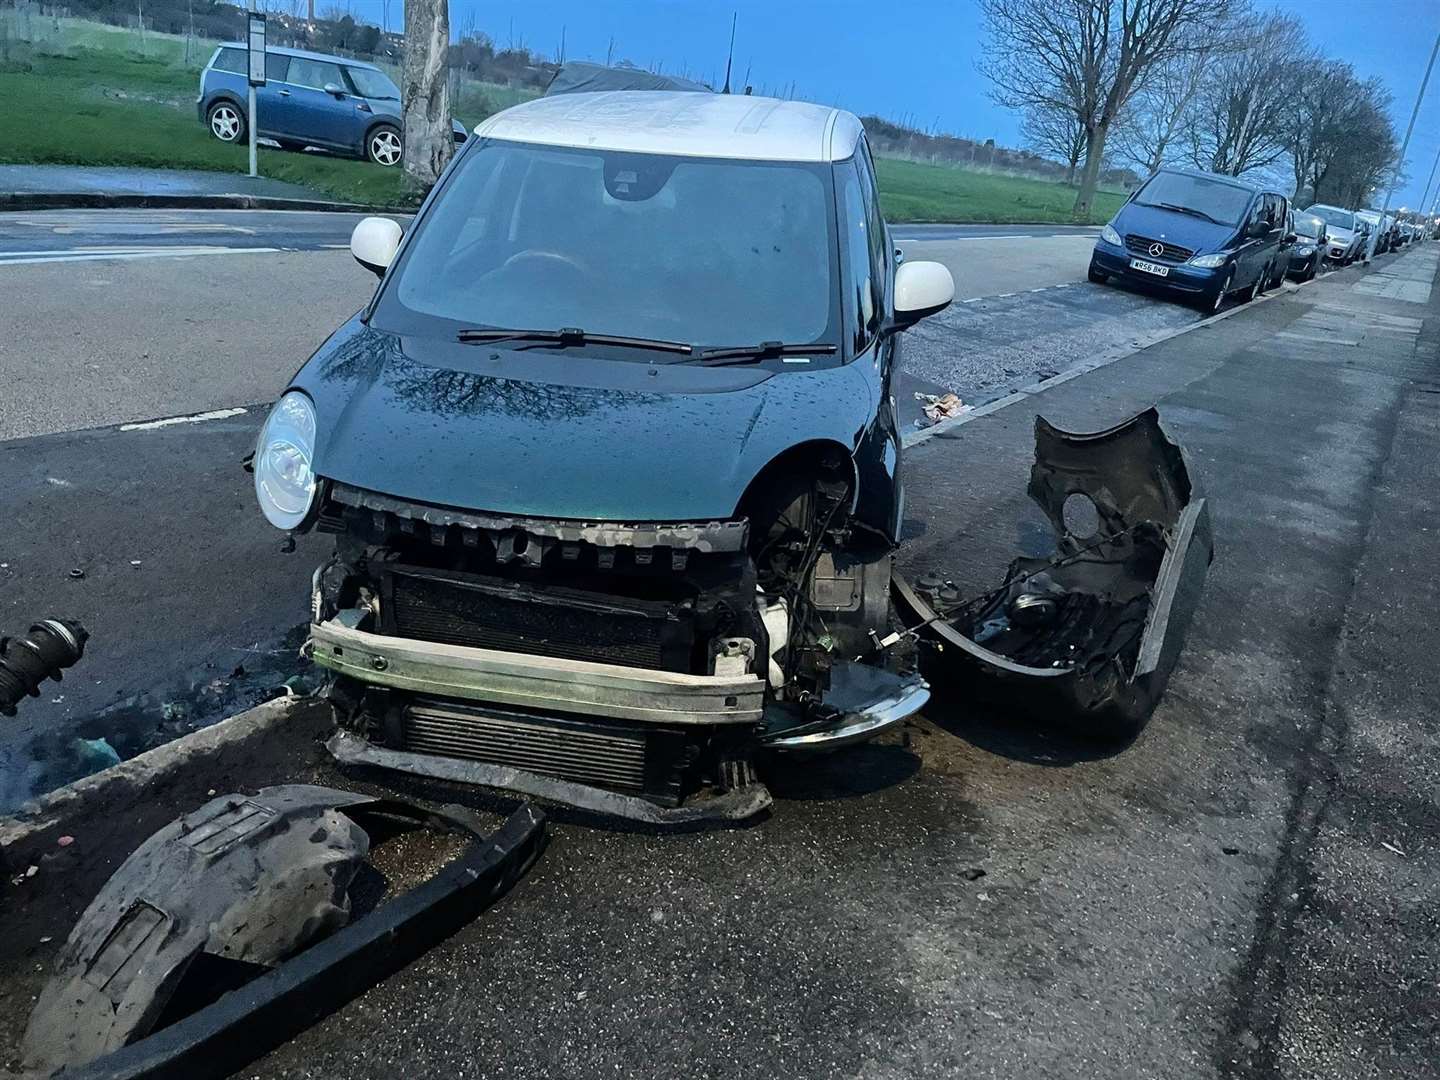 Georgina Botterman's Fiat was written off outside her house in Dane Valley Road, Margate, earlier this month. Picture: Georgina Botterman